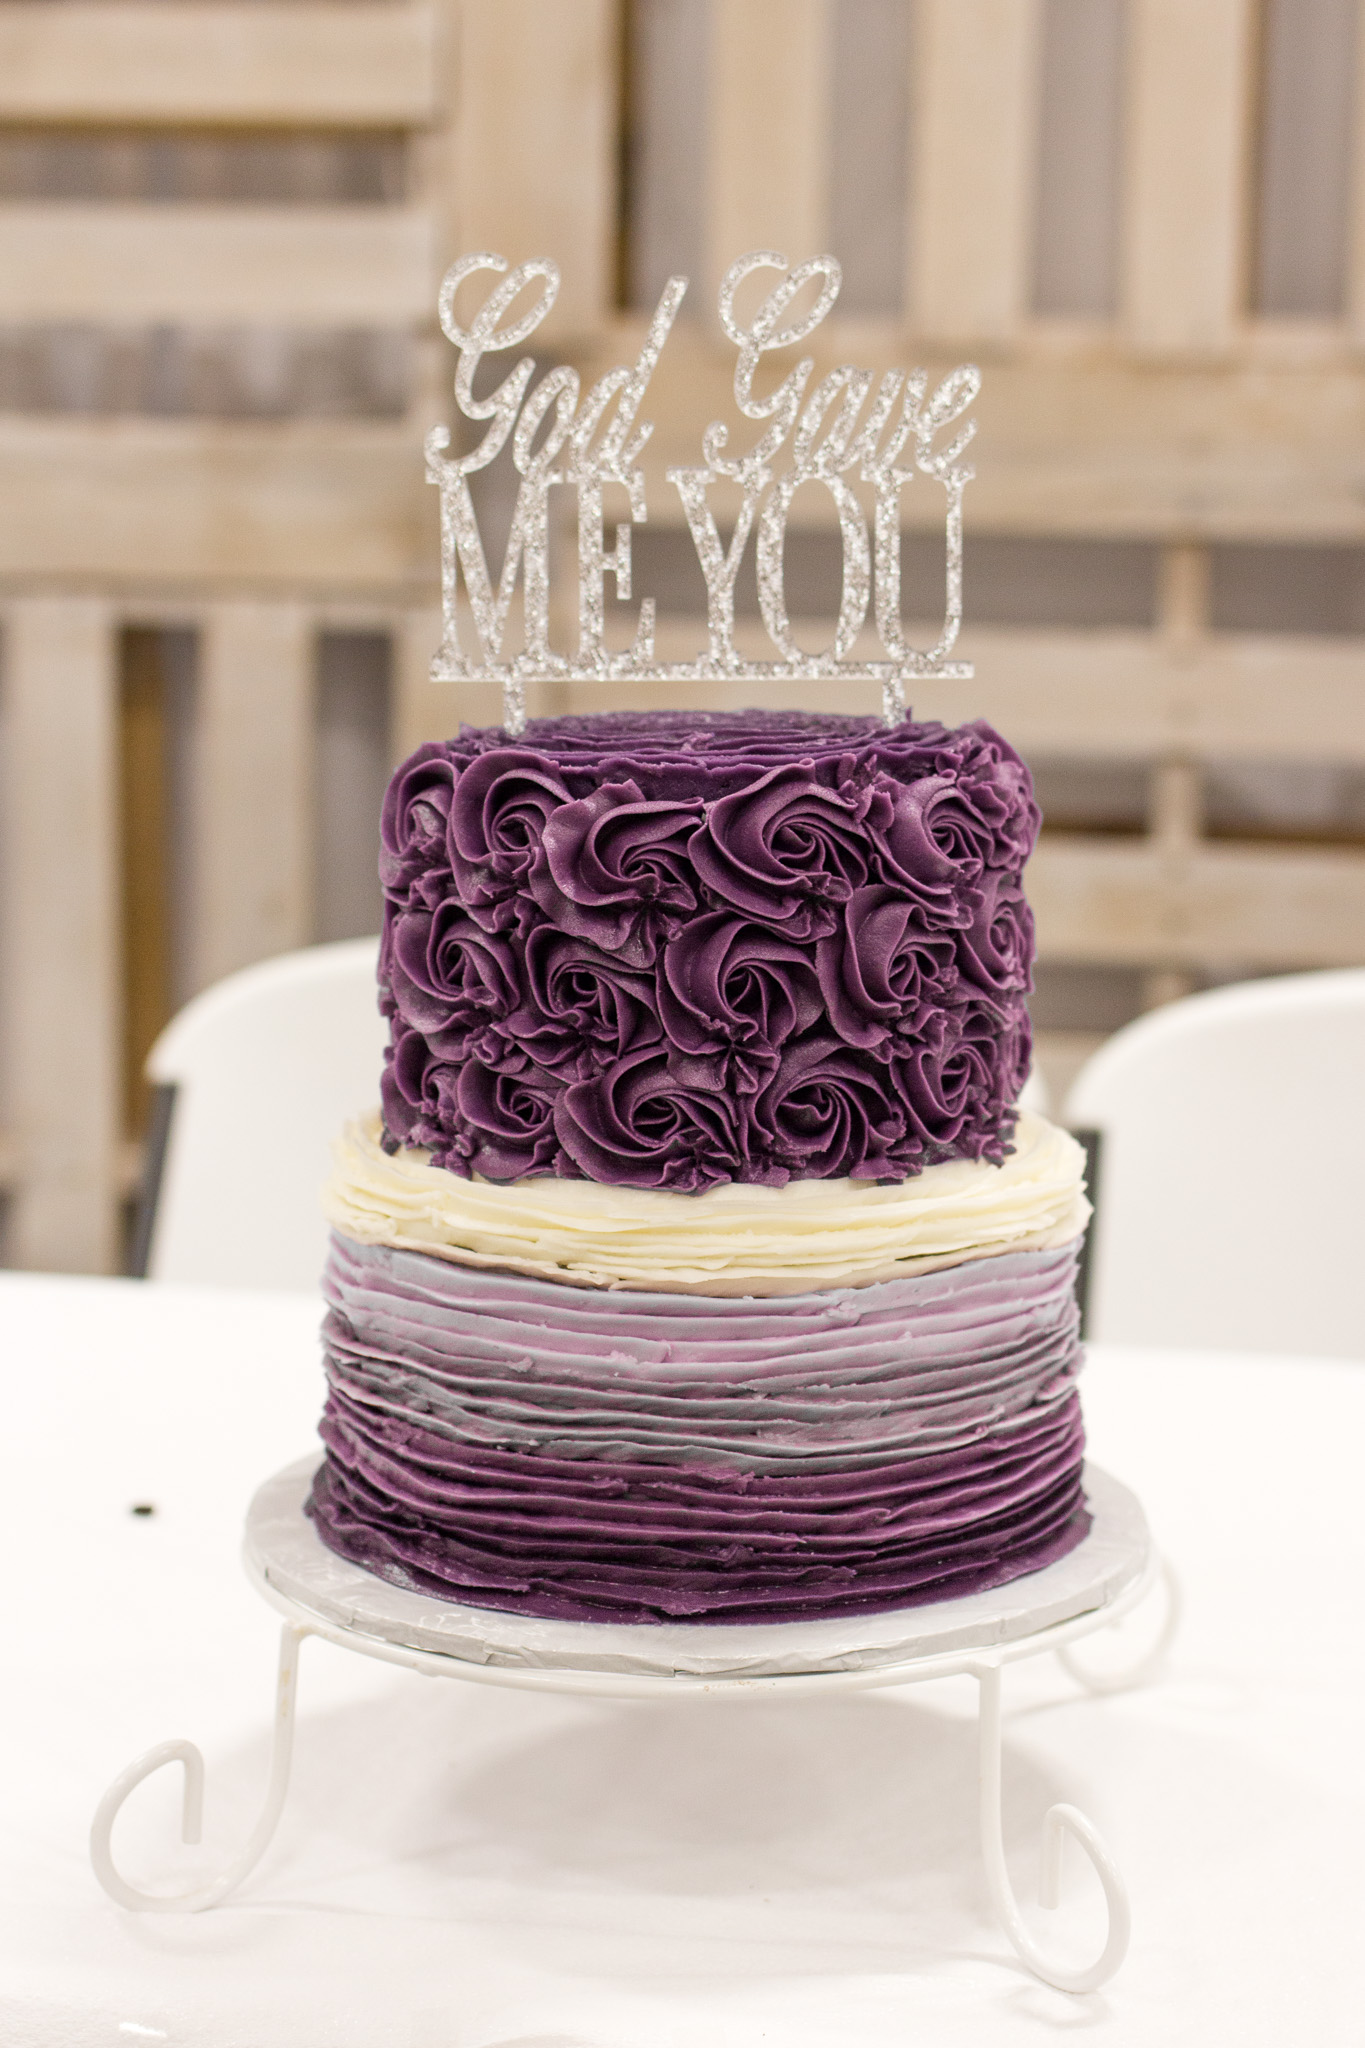 Purple wedding cake with icing flowers and ruffles